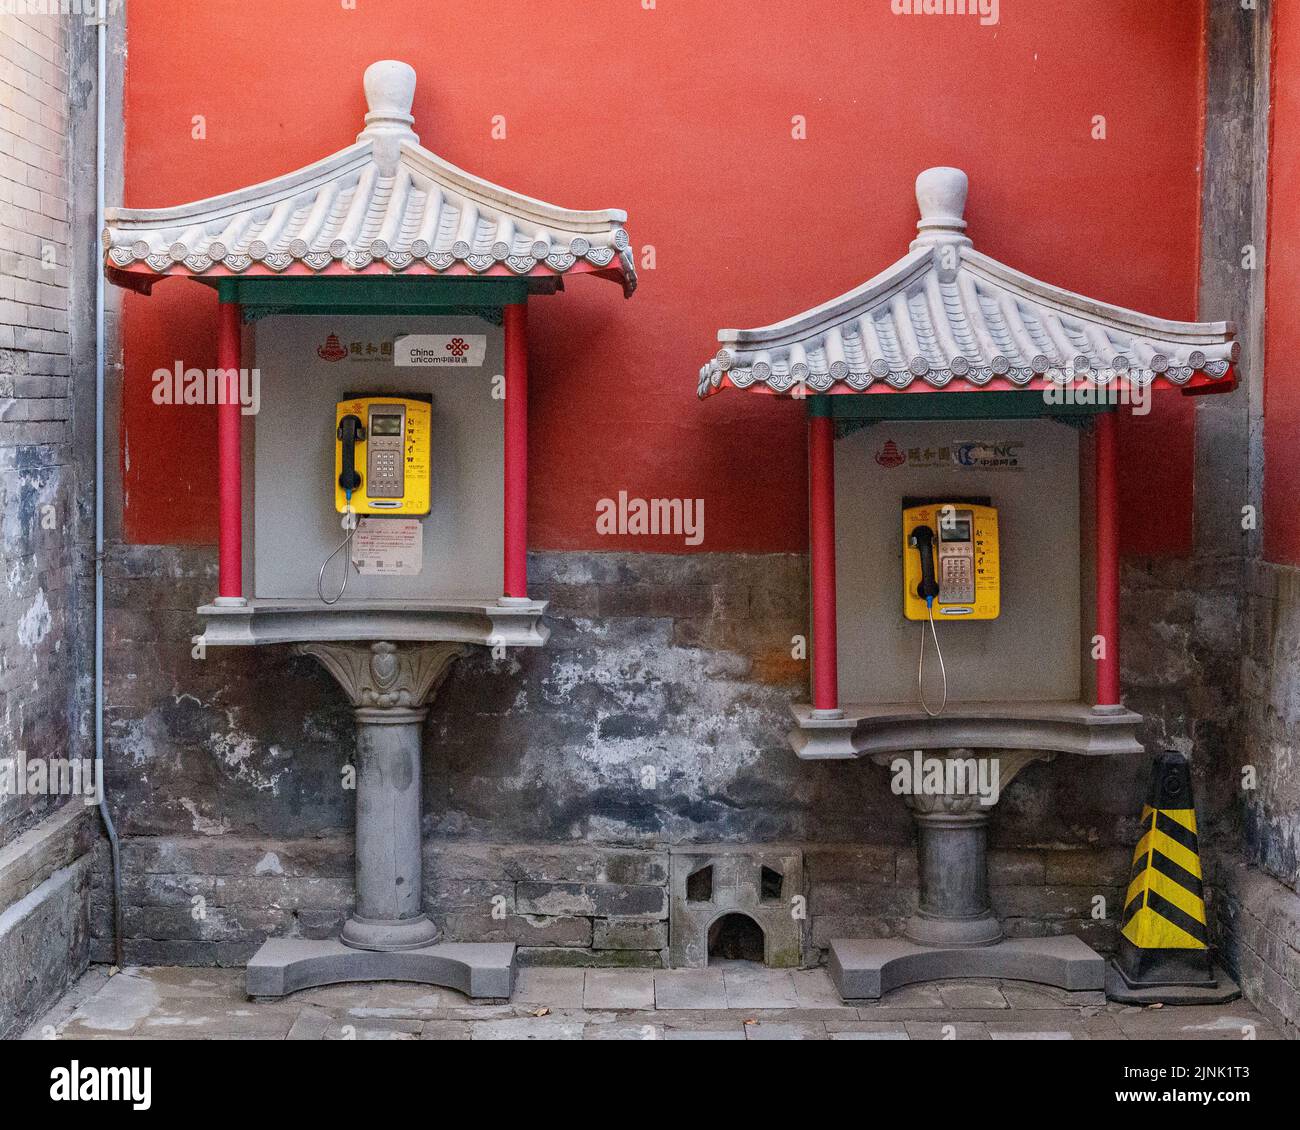 BEIJING, CHINA - MARCH 16, 2018: Palace-themed payphones at the Summer Palace in Beijing, China on March 16, 2018. Stock Photo